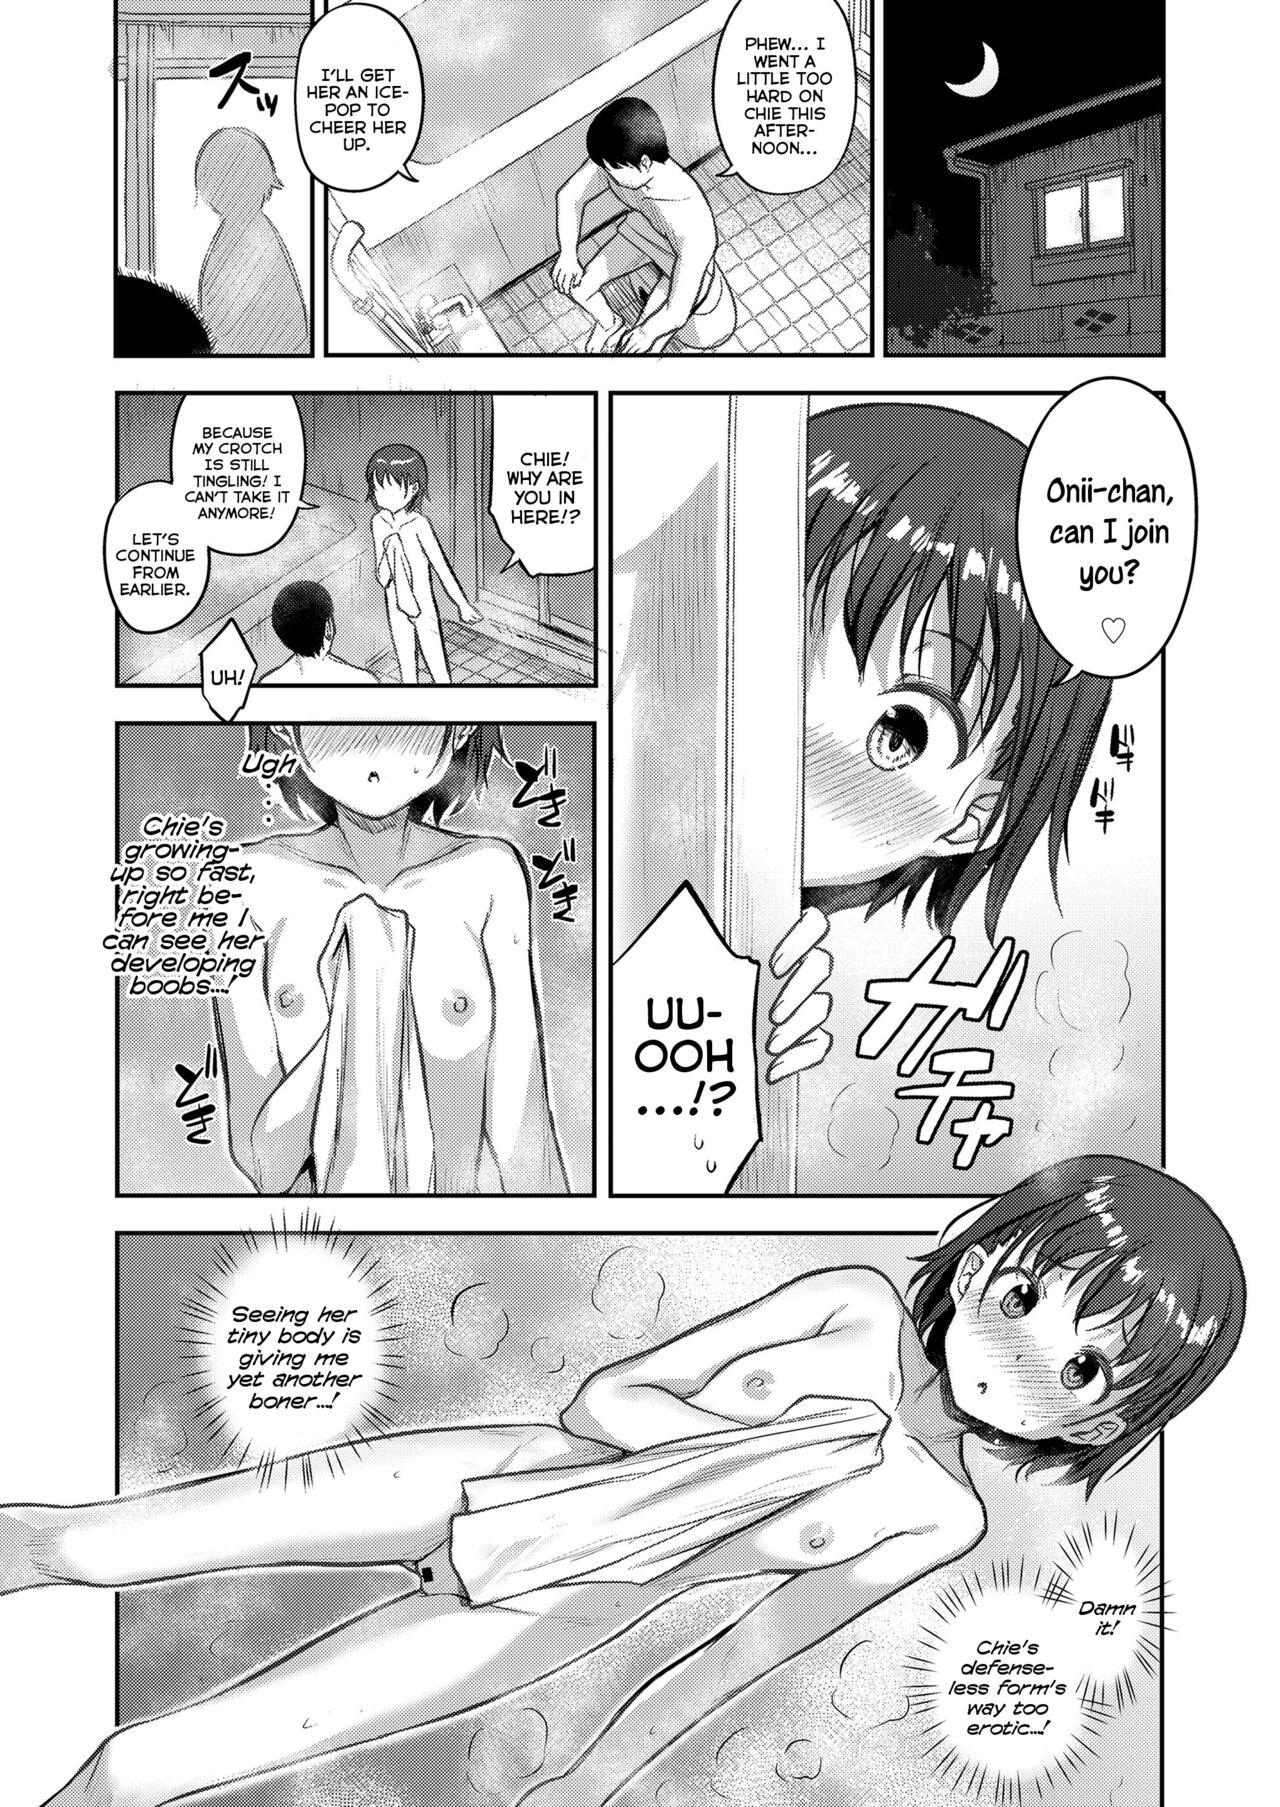 Nerd Koukishin Ousei na Onnanoko | A Young Girl Brimming With Curiousity Amateur Sex - Page 12